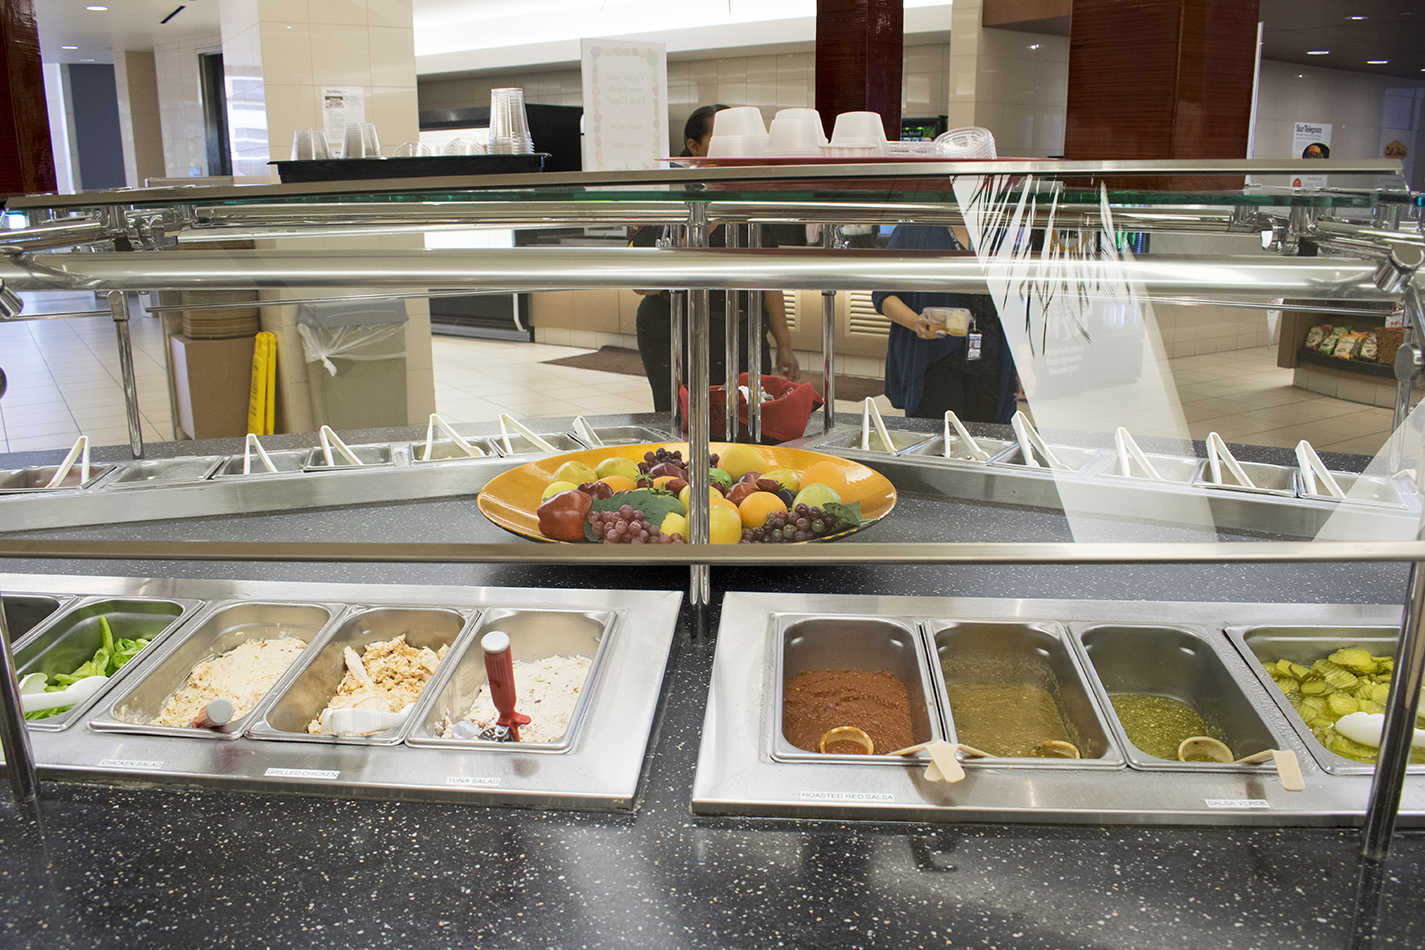 TR’s Riverfront Cafe offers a wide variety of food selections to help students maintain healthy eating habits while studying and attending classes on campus.